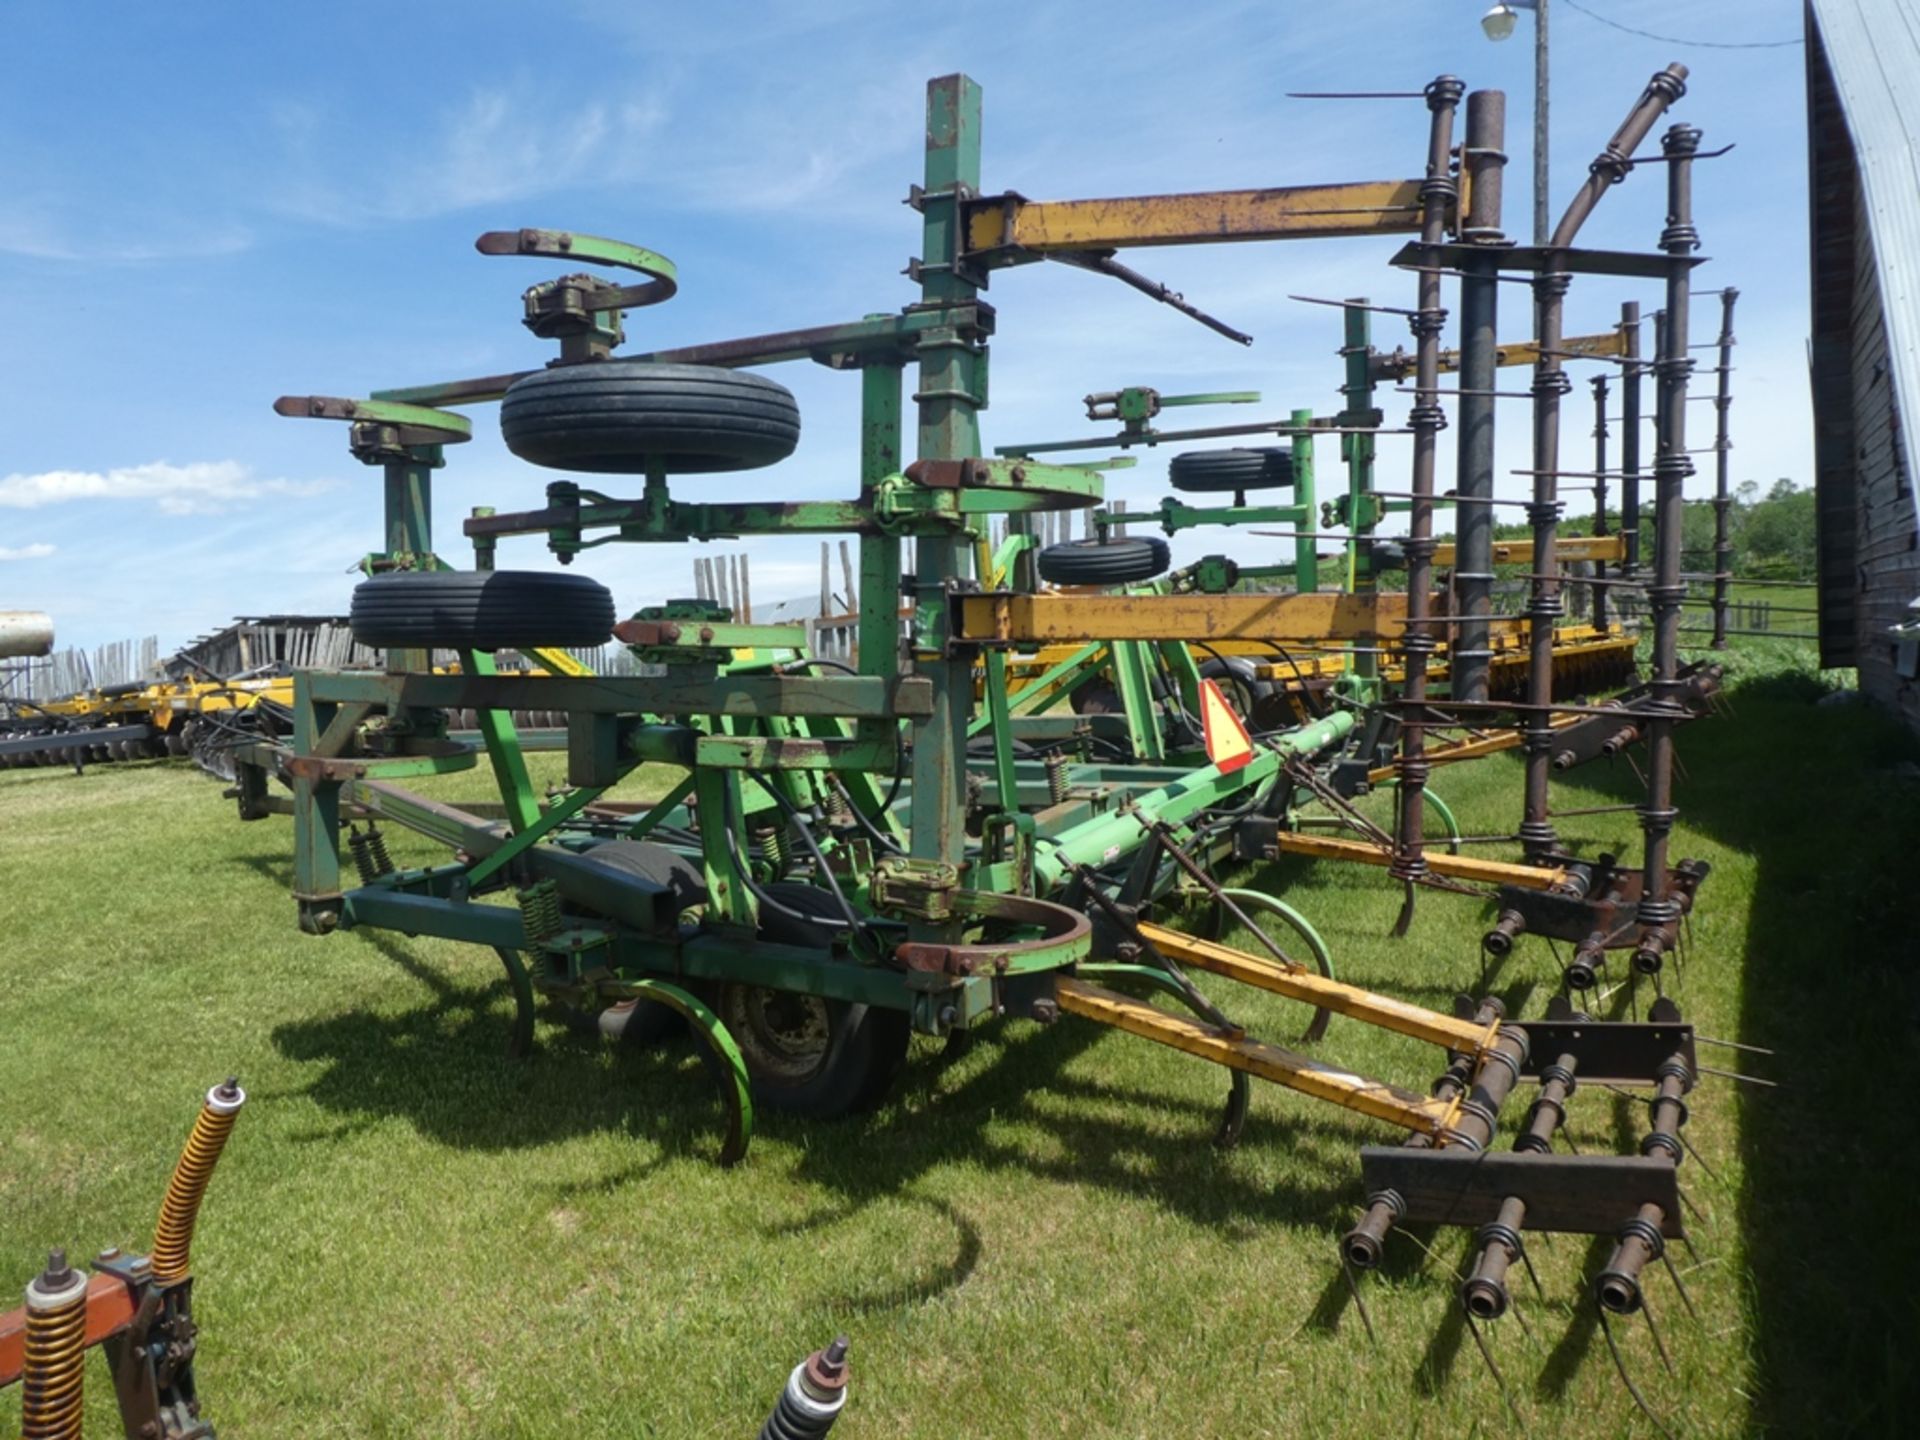 CCIL 807 DT CULTIVATOR-28' W/MOUNTED HARROWS S/N 27411 - Image 3 of 3